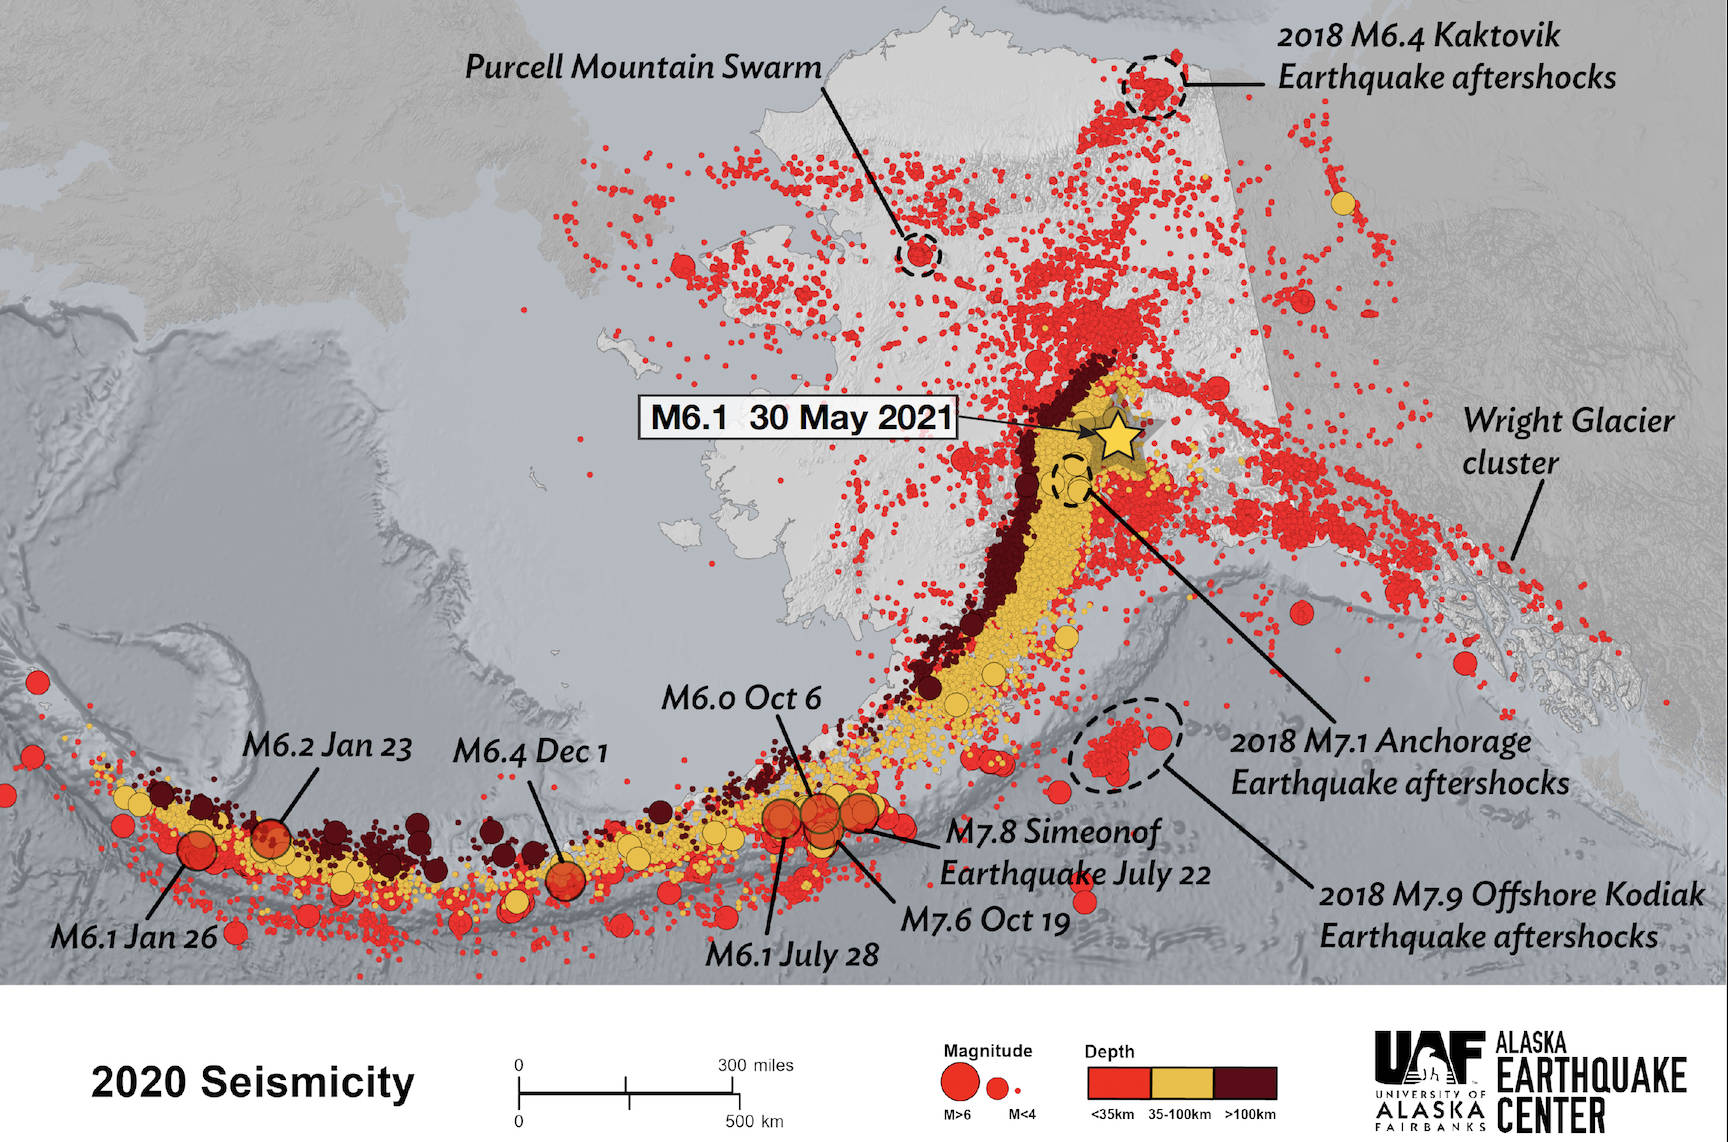 An Alaska Earthquake Center map of all the earthquakes that happened in the year 2020, including the epicenter of a magnitude 6.1 earthquake that happened May 30, 2021. (Courtesy Image / Ned Rozell)